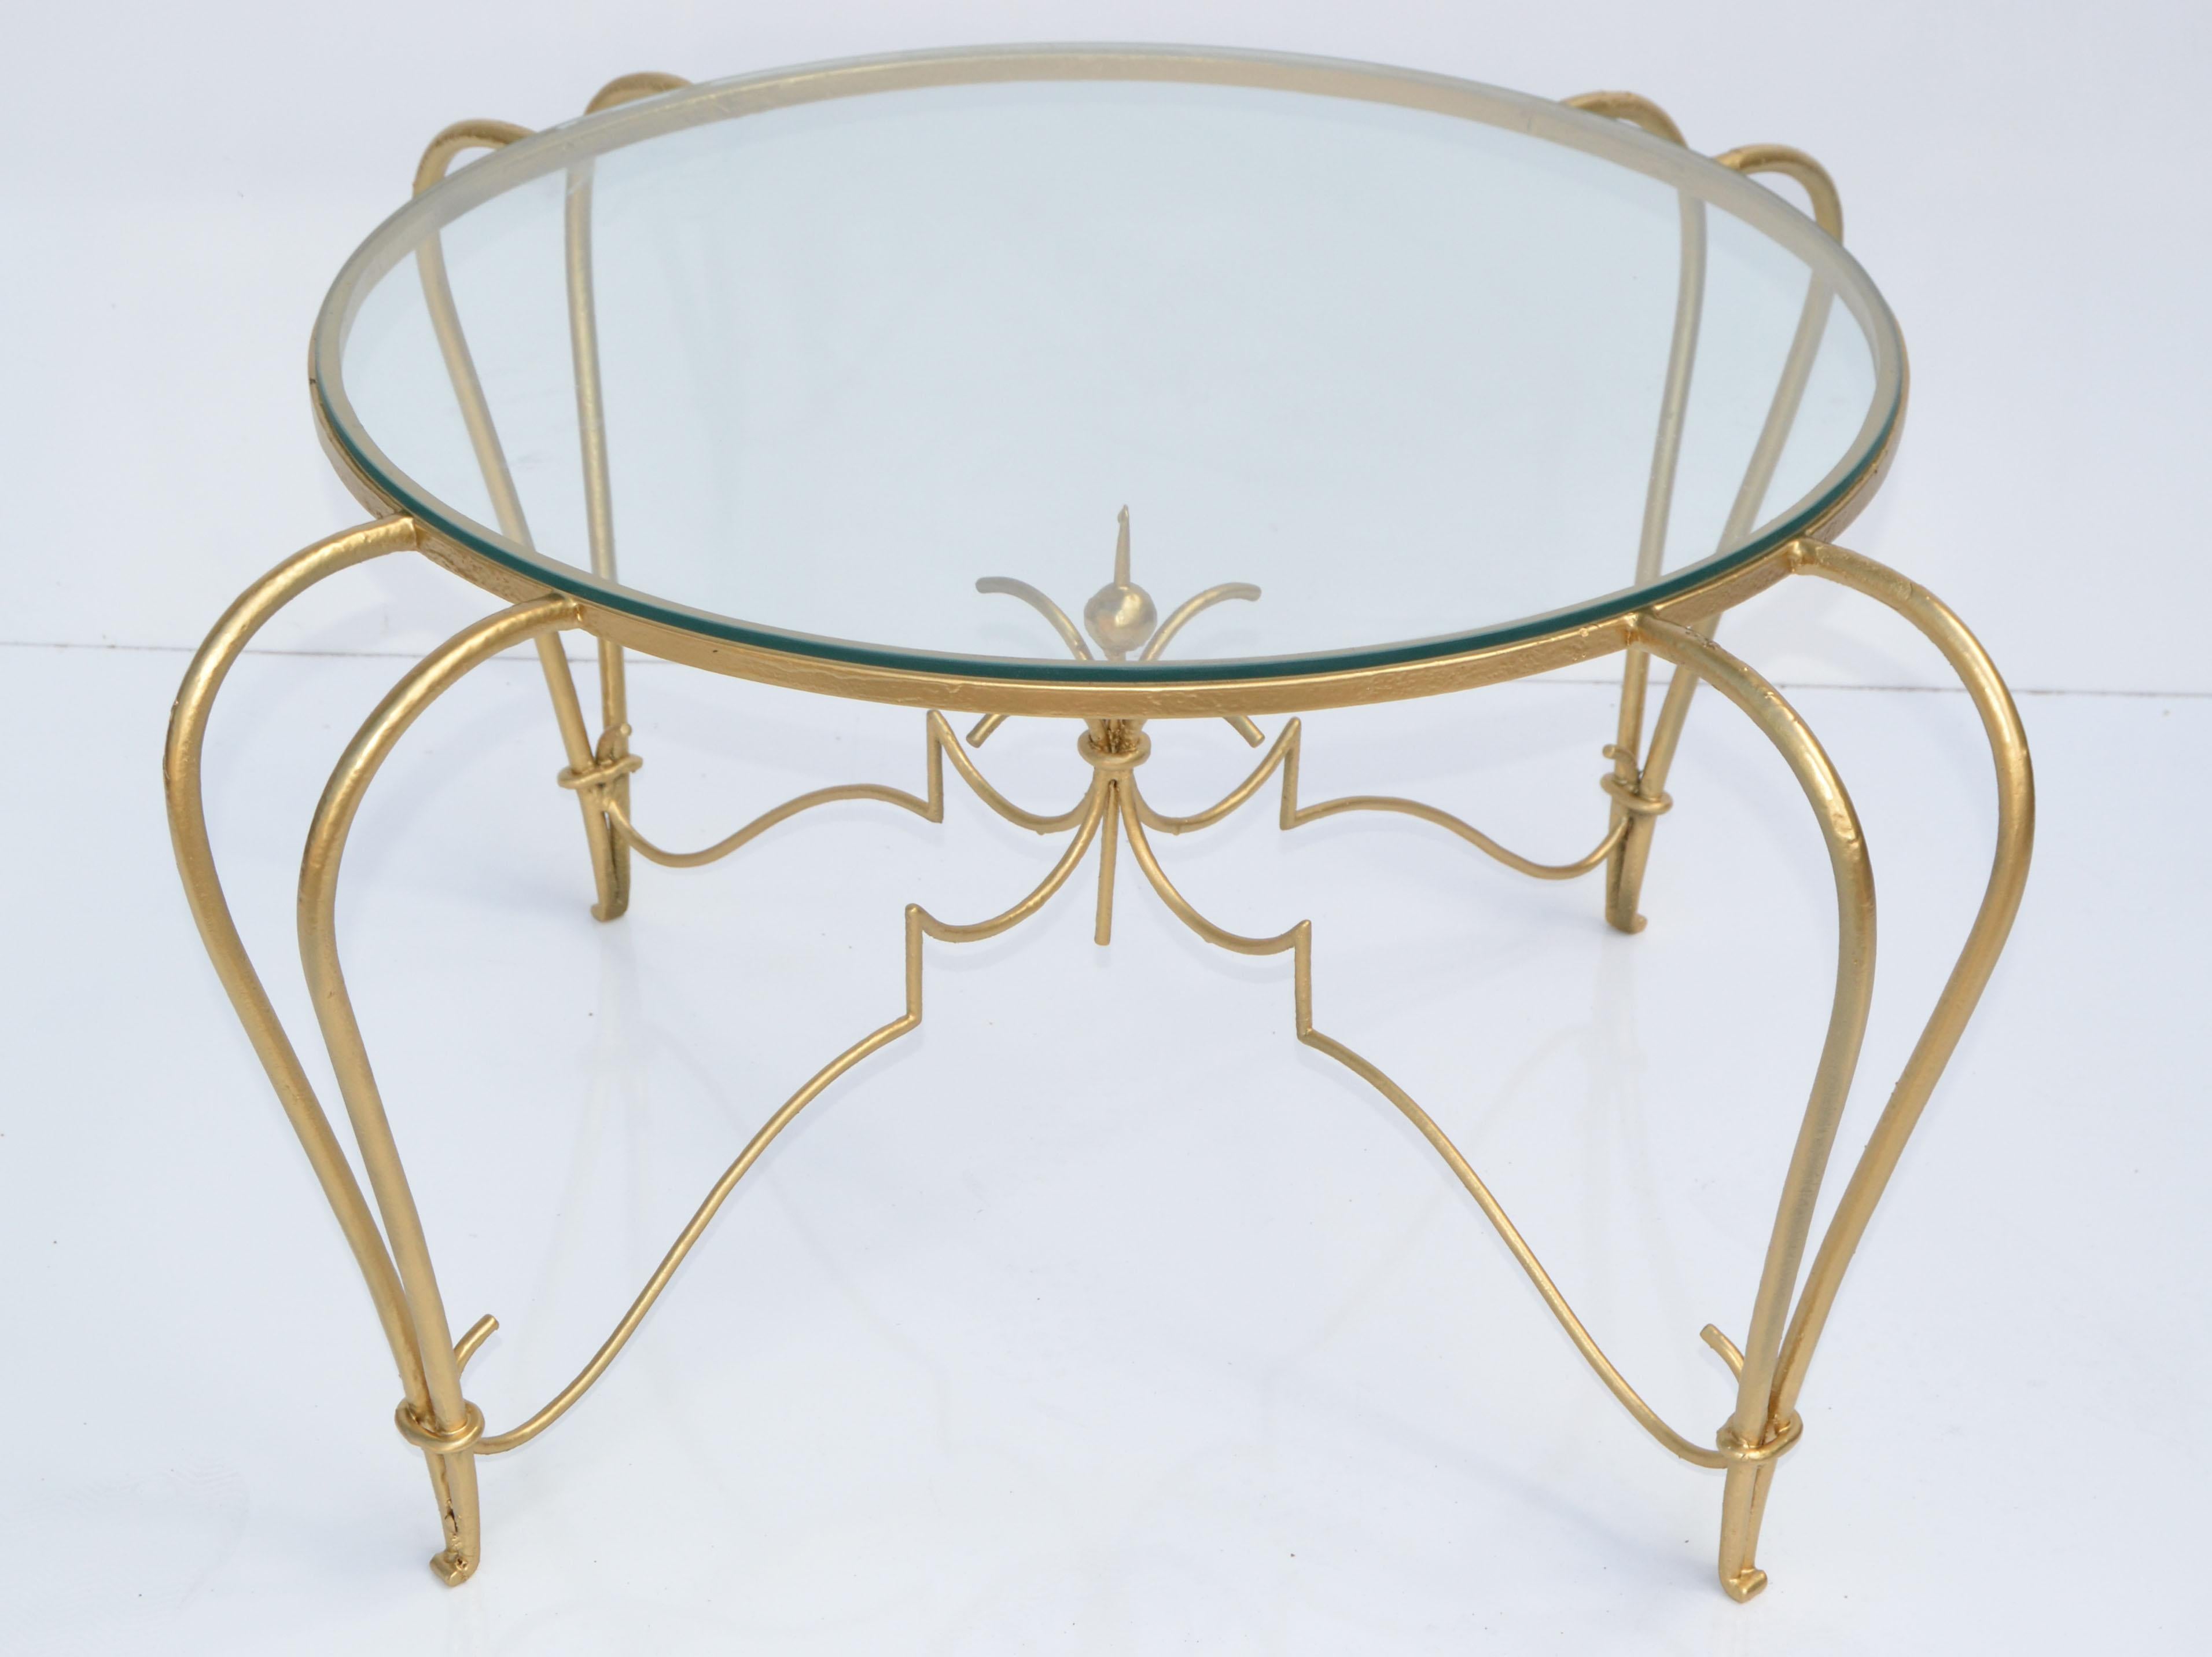 Art Deco Gold Finish Round Wrought Iron & Glass Top Cocktail Table, France, 1950 For Sale 9